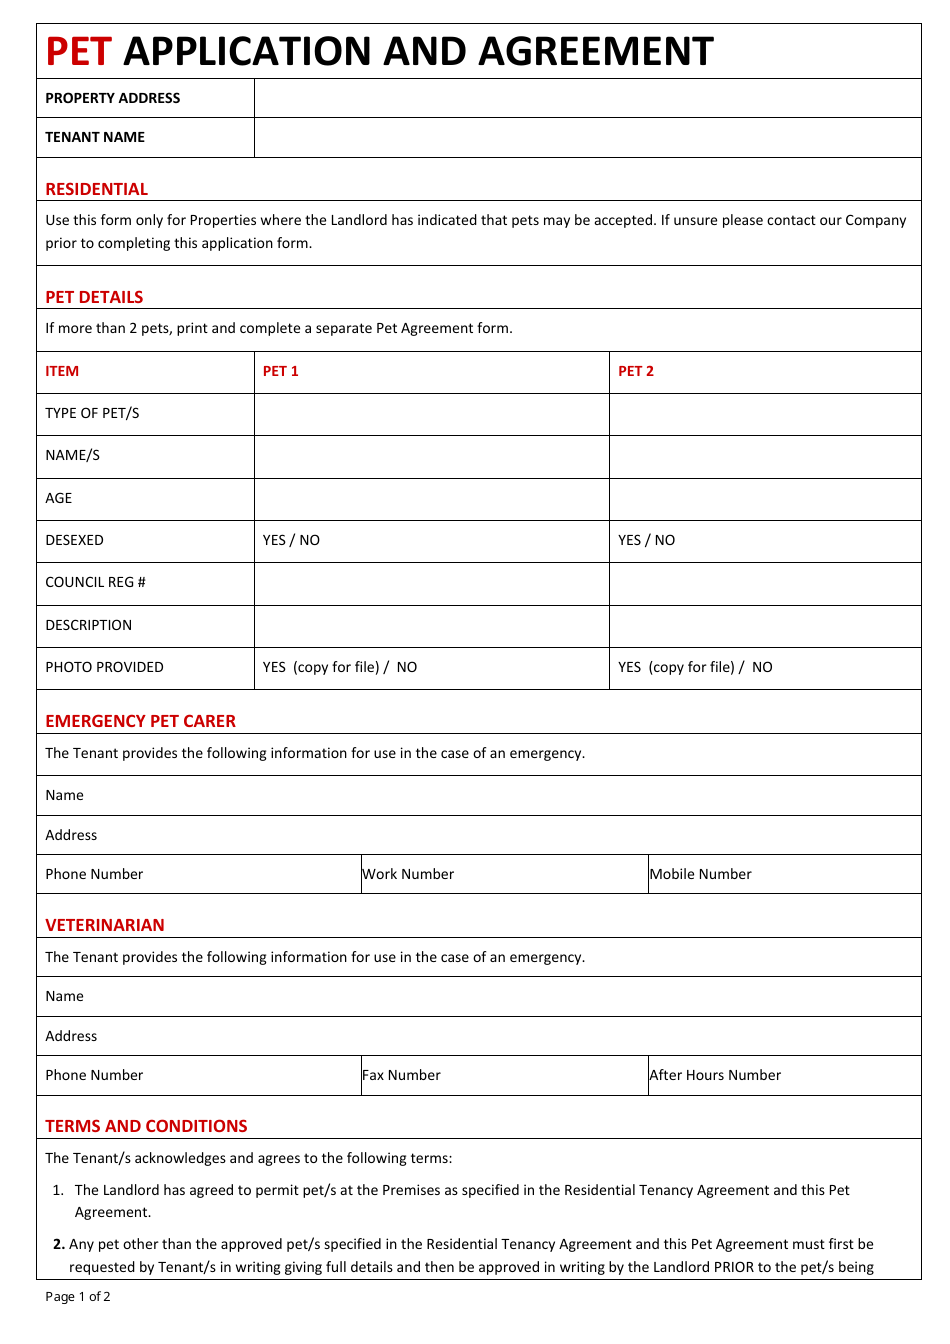 Pet Application and Agreement Template, Page 1